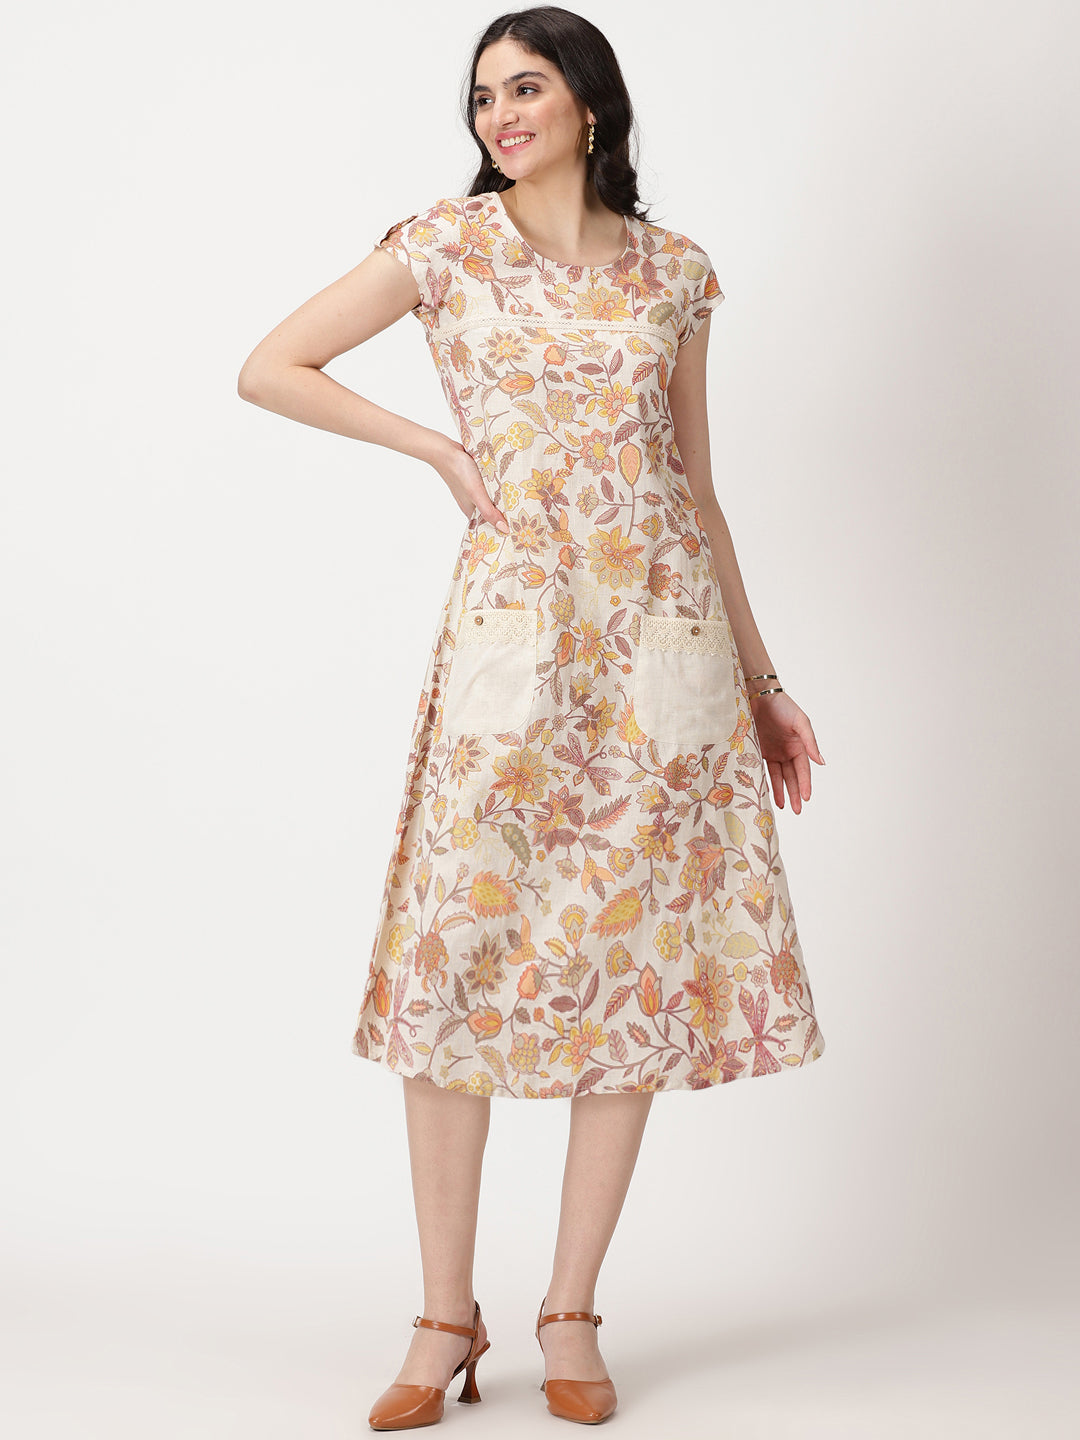 Off White-Yellow Ethnic Floral Print Midi Dress with Patch Pockets